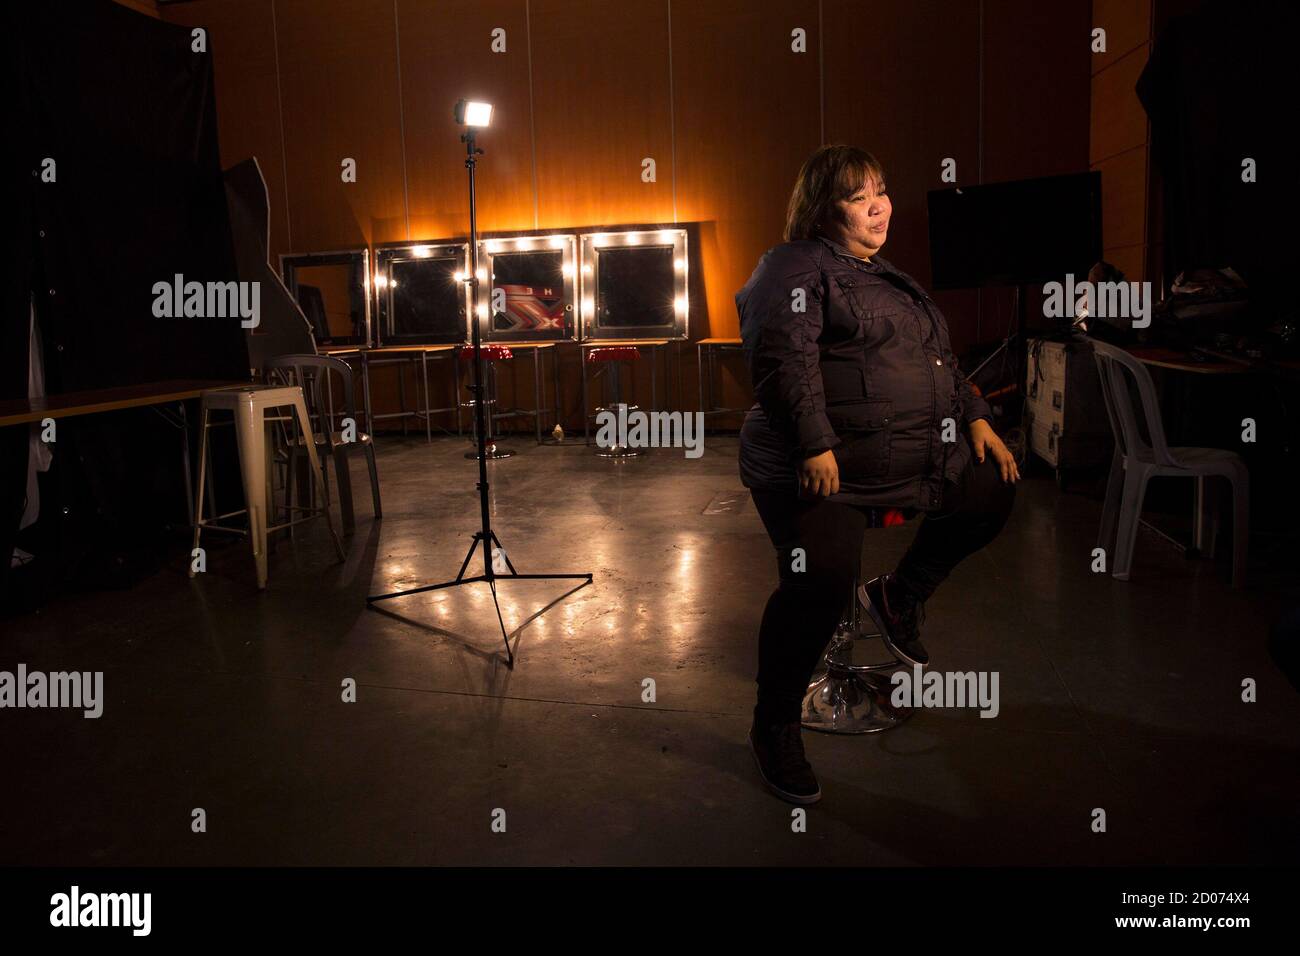 Rose Fostanes,47, a Filipina caregiver, sits during her interview with Reuters in a dressing room before a rehearsal for Israel's X-Factor talent show in Tel Aviv January 12, 2014. Fostanes surprised viewers of the talent show and swept its judges off their feet with soulful renditions of hit songs by the likes of pop stars Lady Gaga and Christina Aguilera, and has rocked her way to Tuesday's live final. Picture taken January 12, 2014. REUTER/Baz Ratner (ISRAEL - Tags: ENTERTAINMENT SOCIETY) Stock Photo